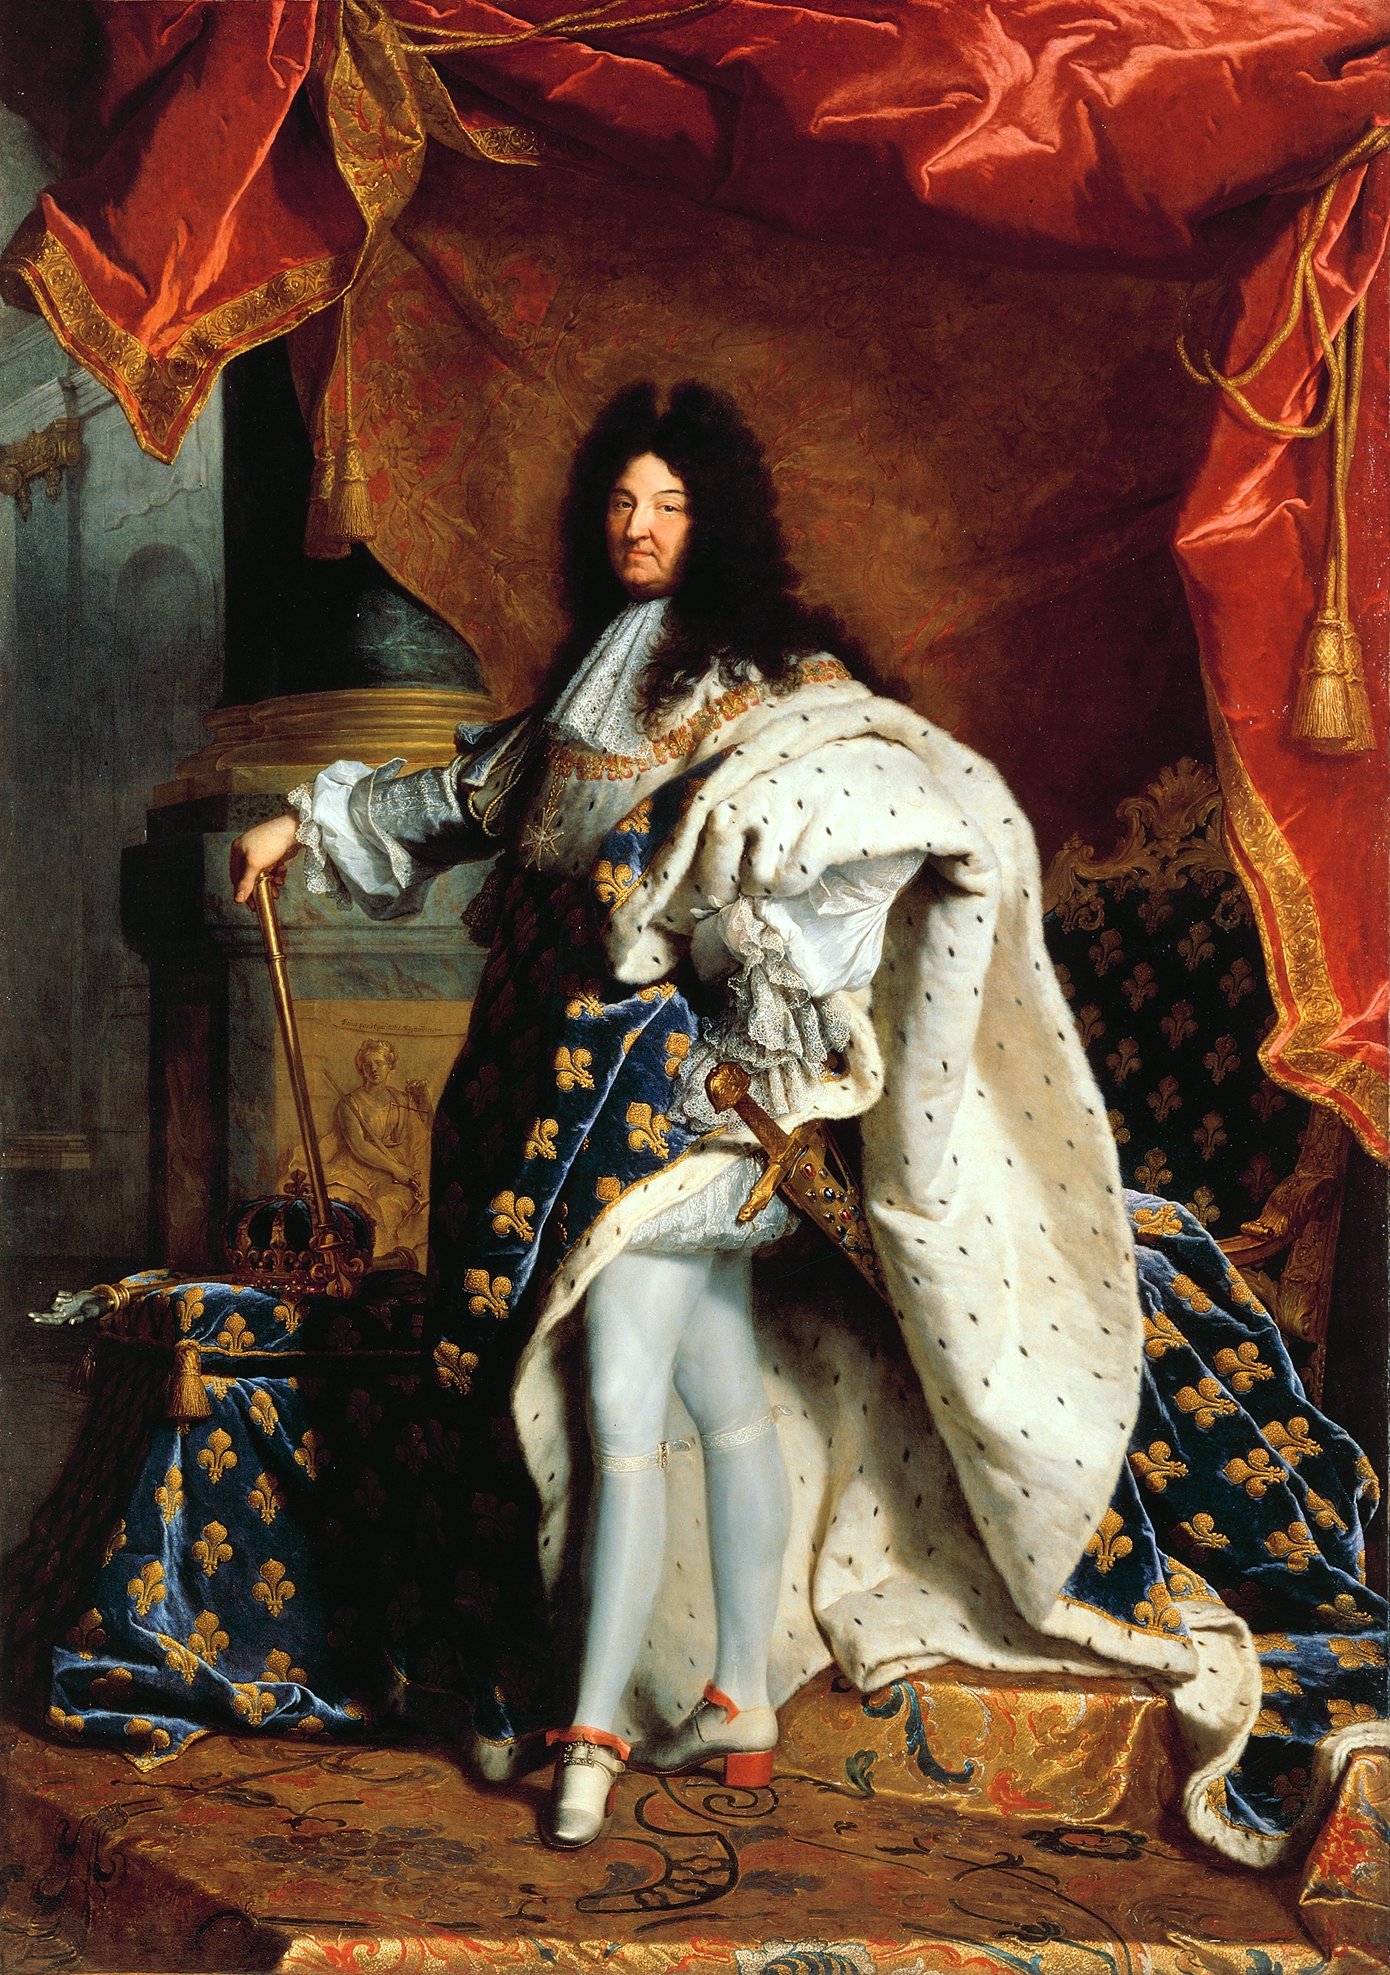 A portrait featuring king Louis XIV, he is dressed in a long blue fur coat covered in fleur-de-lis symbols and white stockings.